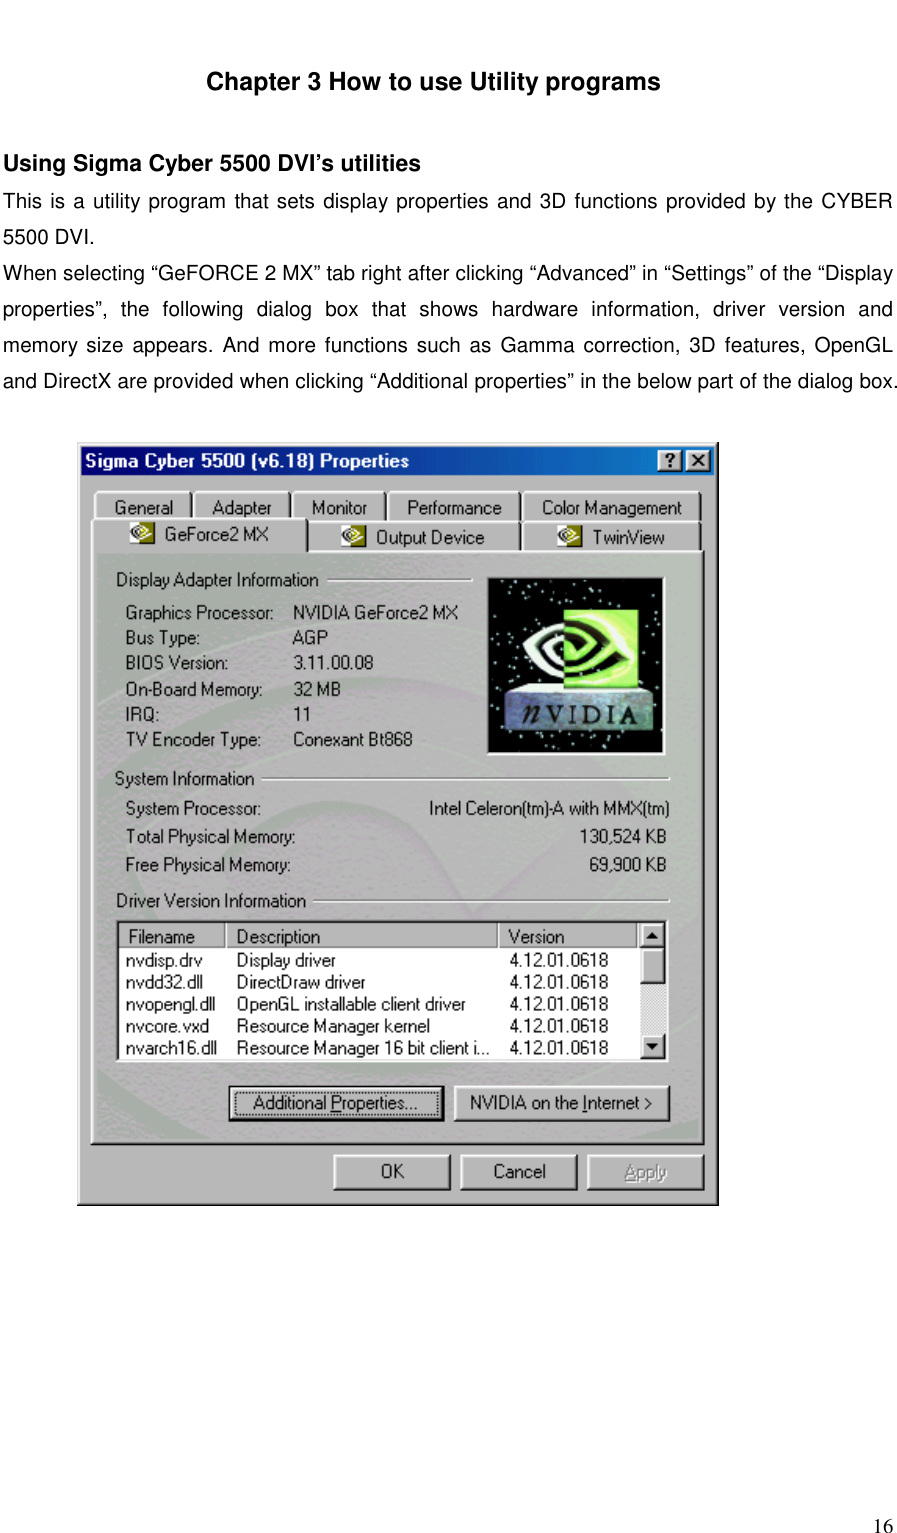     16   Chapter 3 How to use Utility programs   Using Sigma Cyber 5500 DVI’s utilities This is a utility program that sets display properties and 3D functions provided by the CYBER 5500 DVI. When selecting “GeFORCE 2 MX” tab right after clicking “Advanced” in “Settings” of the “Display properties”, the following dialog box that shows hardware information, driver version and memory size appears. And more functions such as Gamma correction, 3D features, OpenGL and DirectX are provided when clicking “Additional properties” in the below part of the dialog box.   